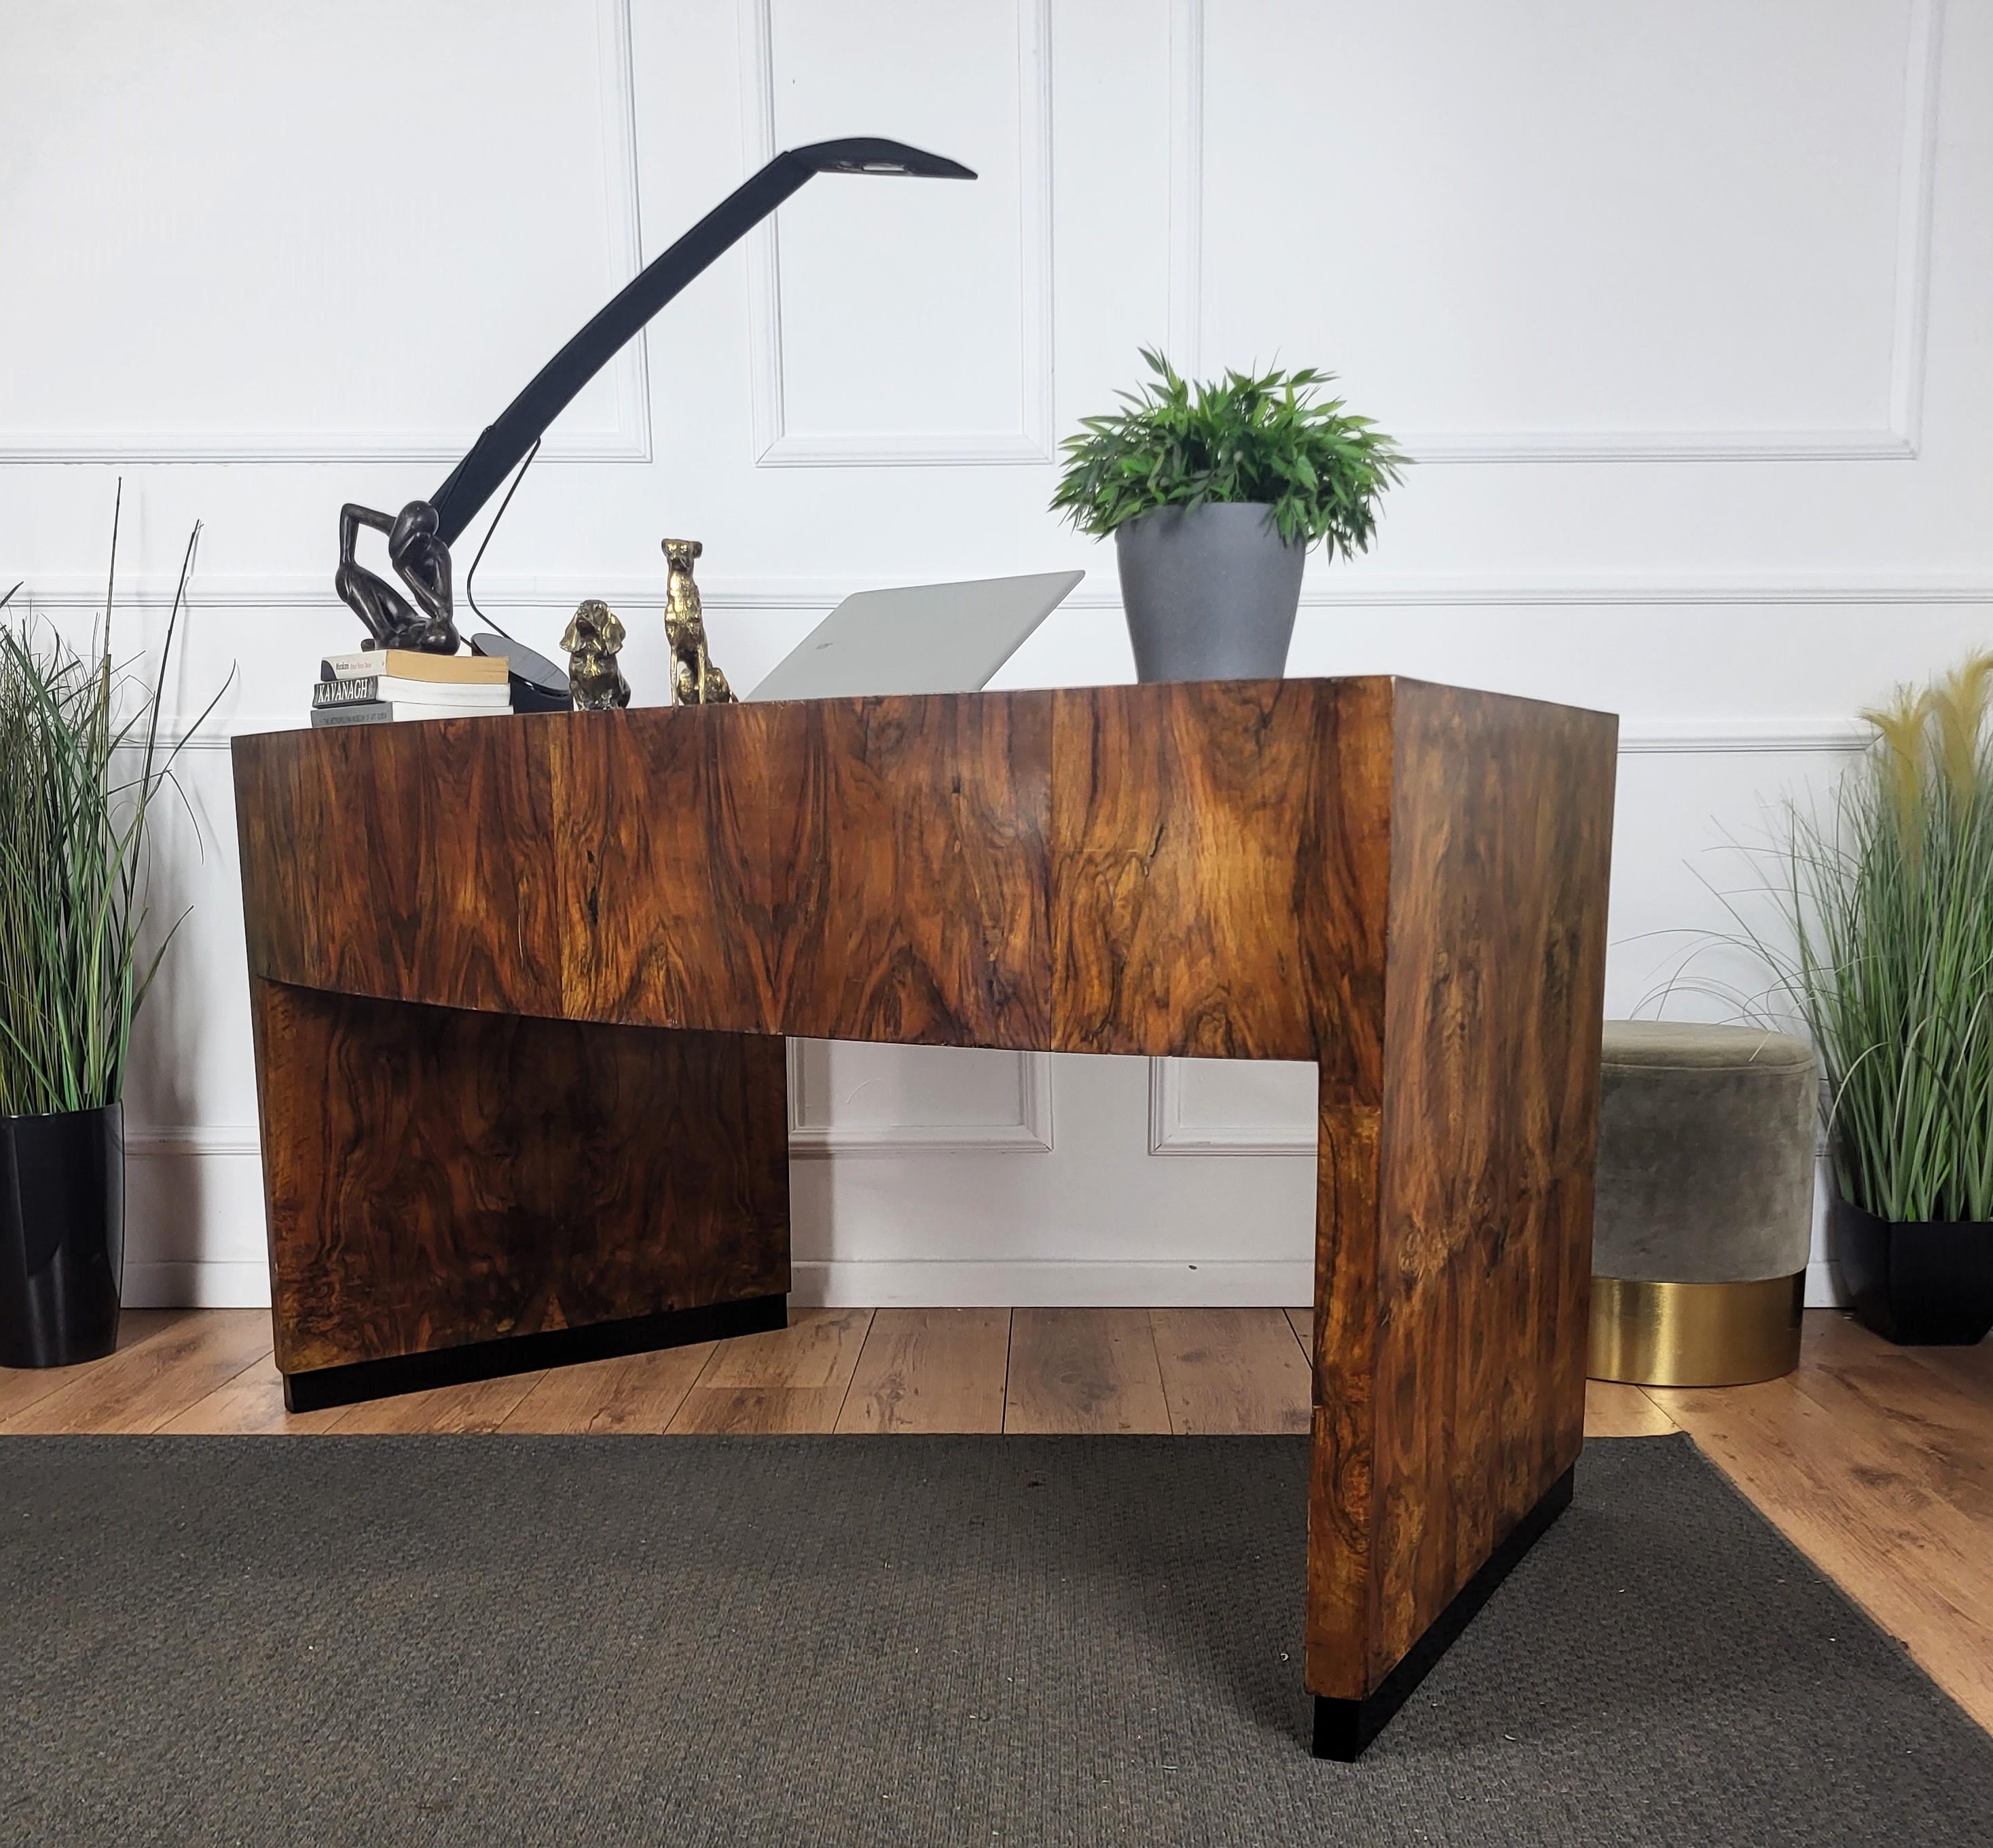 Stunning Italian Art Deco Mid-Century Modern desk writing table, in beautiful veneer burr walnut wood with beautiful and elegant curved shape, completed by the side and central drawers with brass handle. The unique and typical design, with the clean